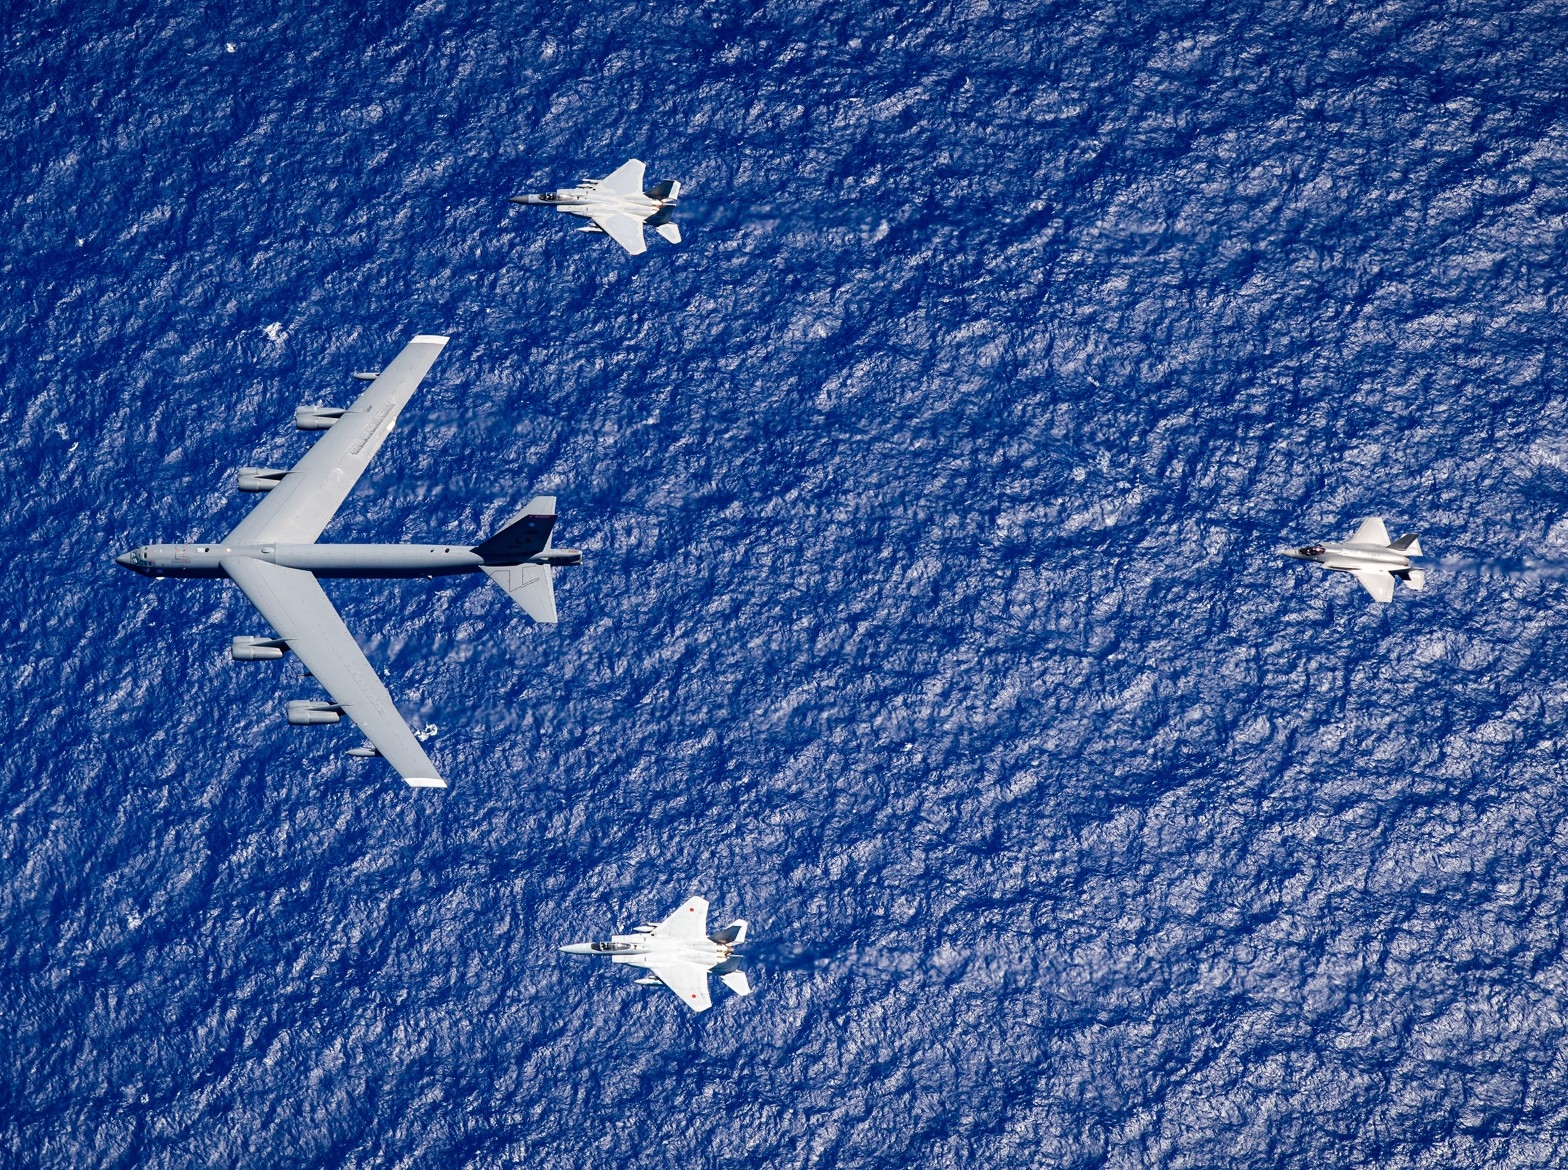 Managing Escalation While Competing Effectively in the Indo-Pacific